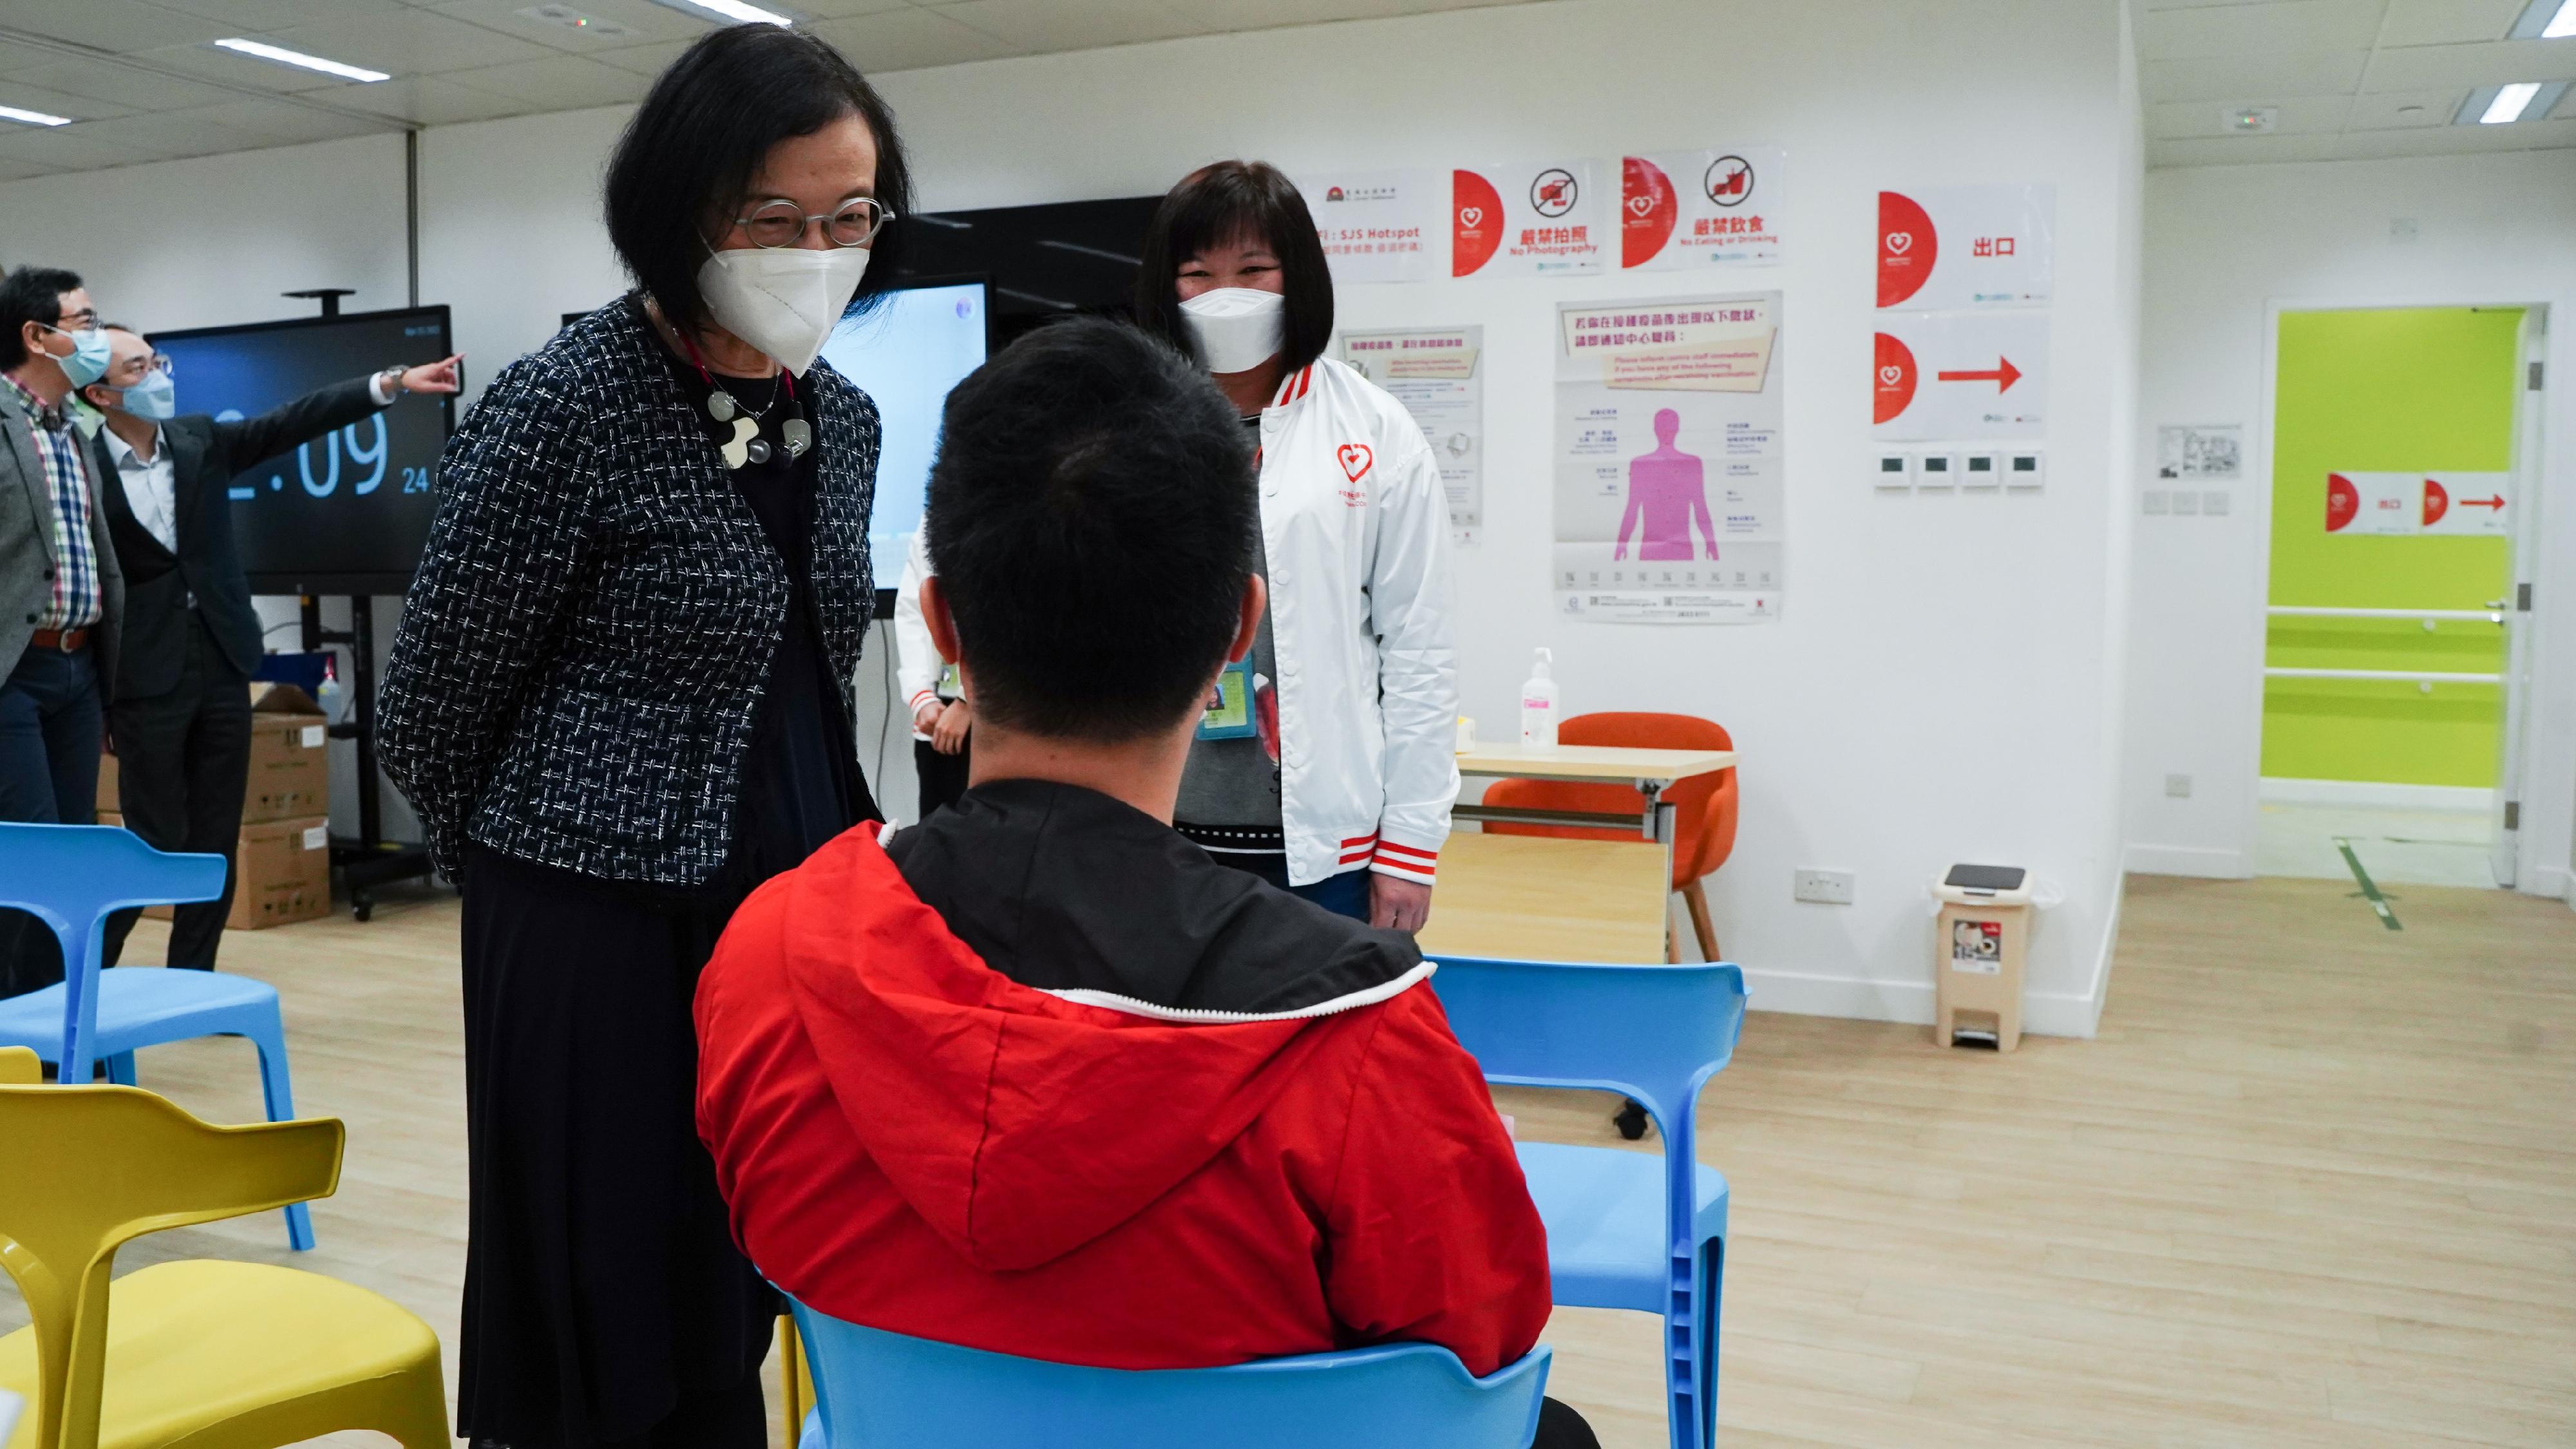 The Secretary for Food and Health, Professor Sophia Chan, visited Sham Shui Po District Health Centre today (March 25) to learn more about the provision of the BioNTech vaccination service there. Photo shows Professor Chan (left) chatting with a citizen getting a jab there.